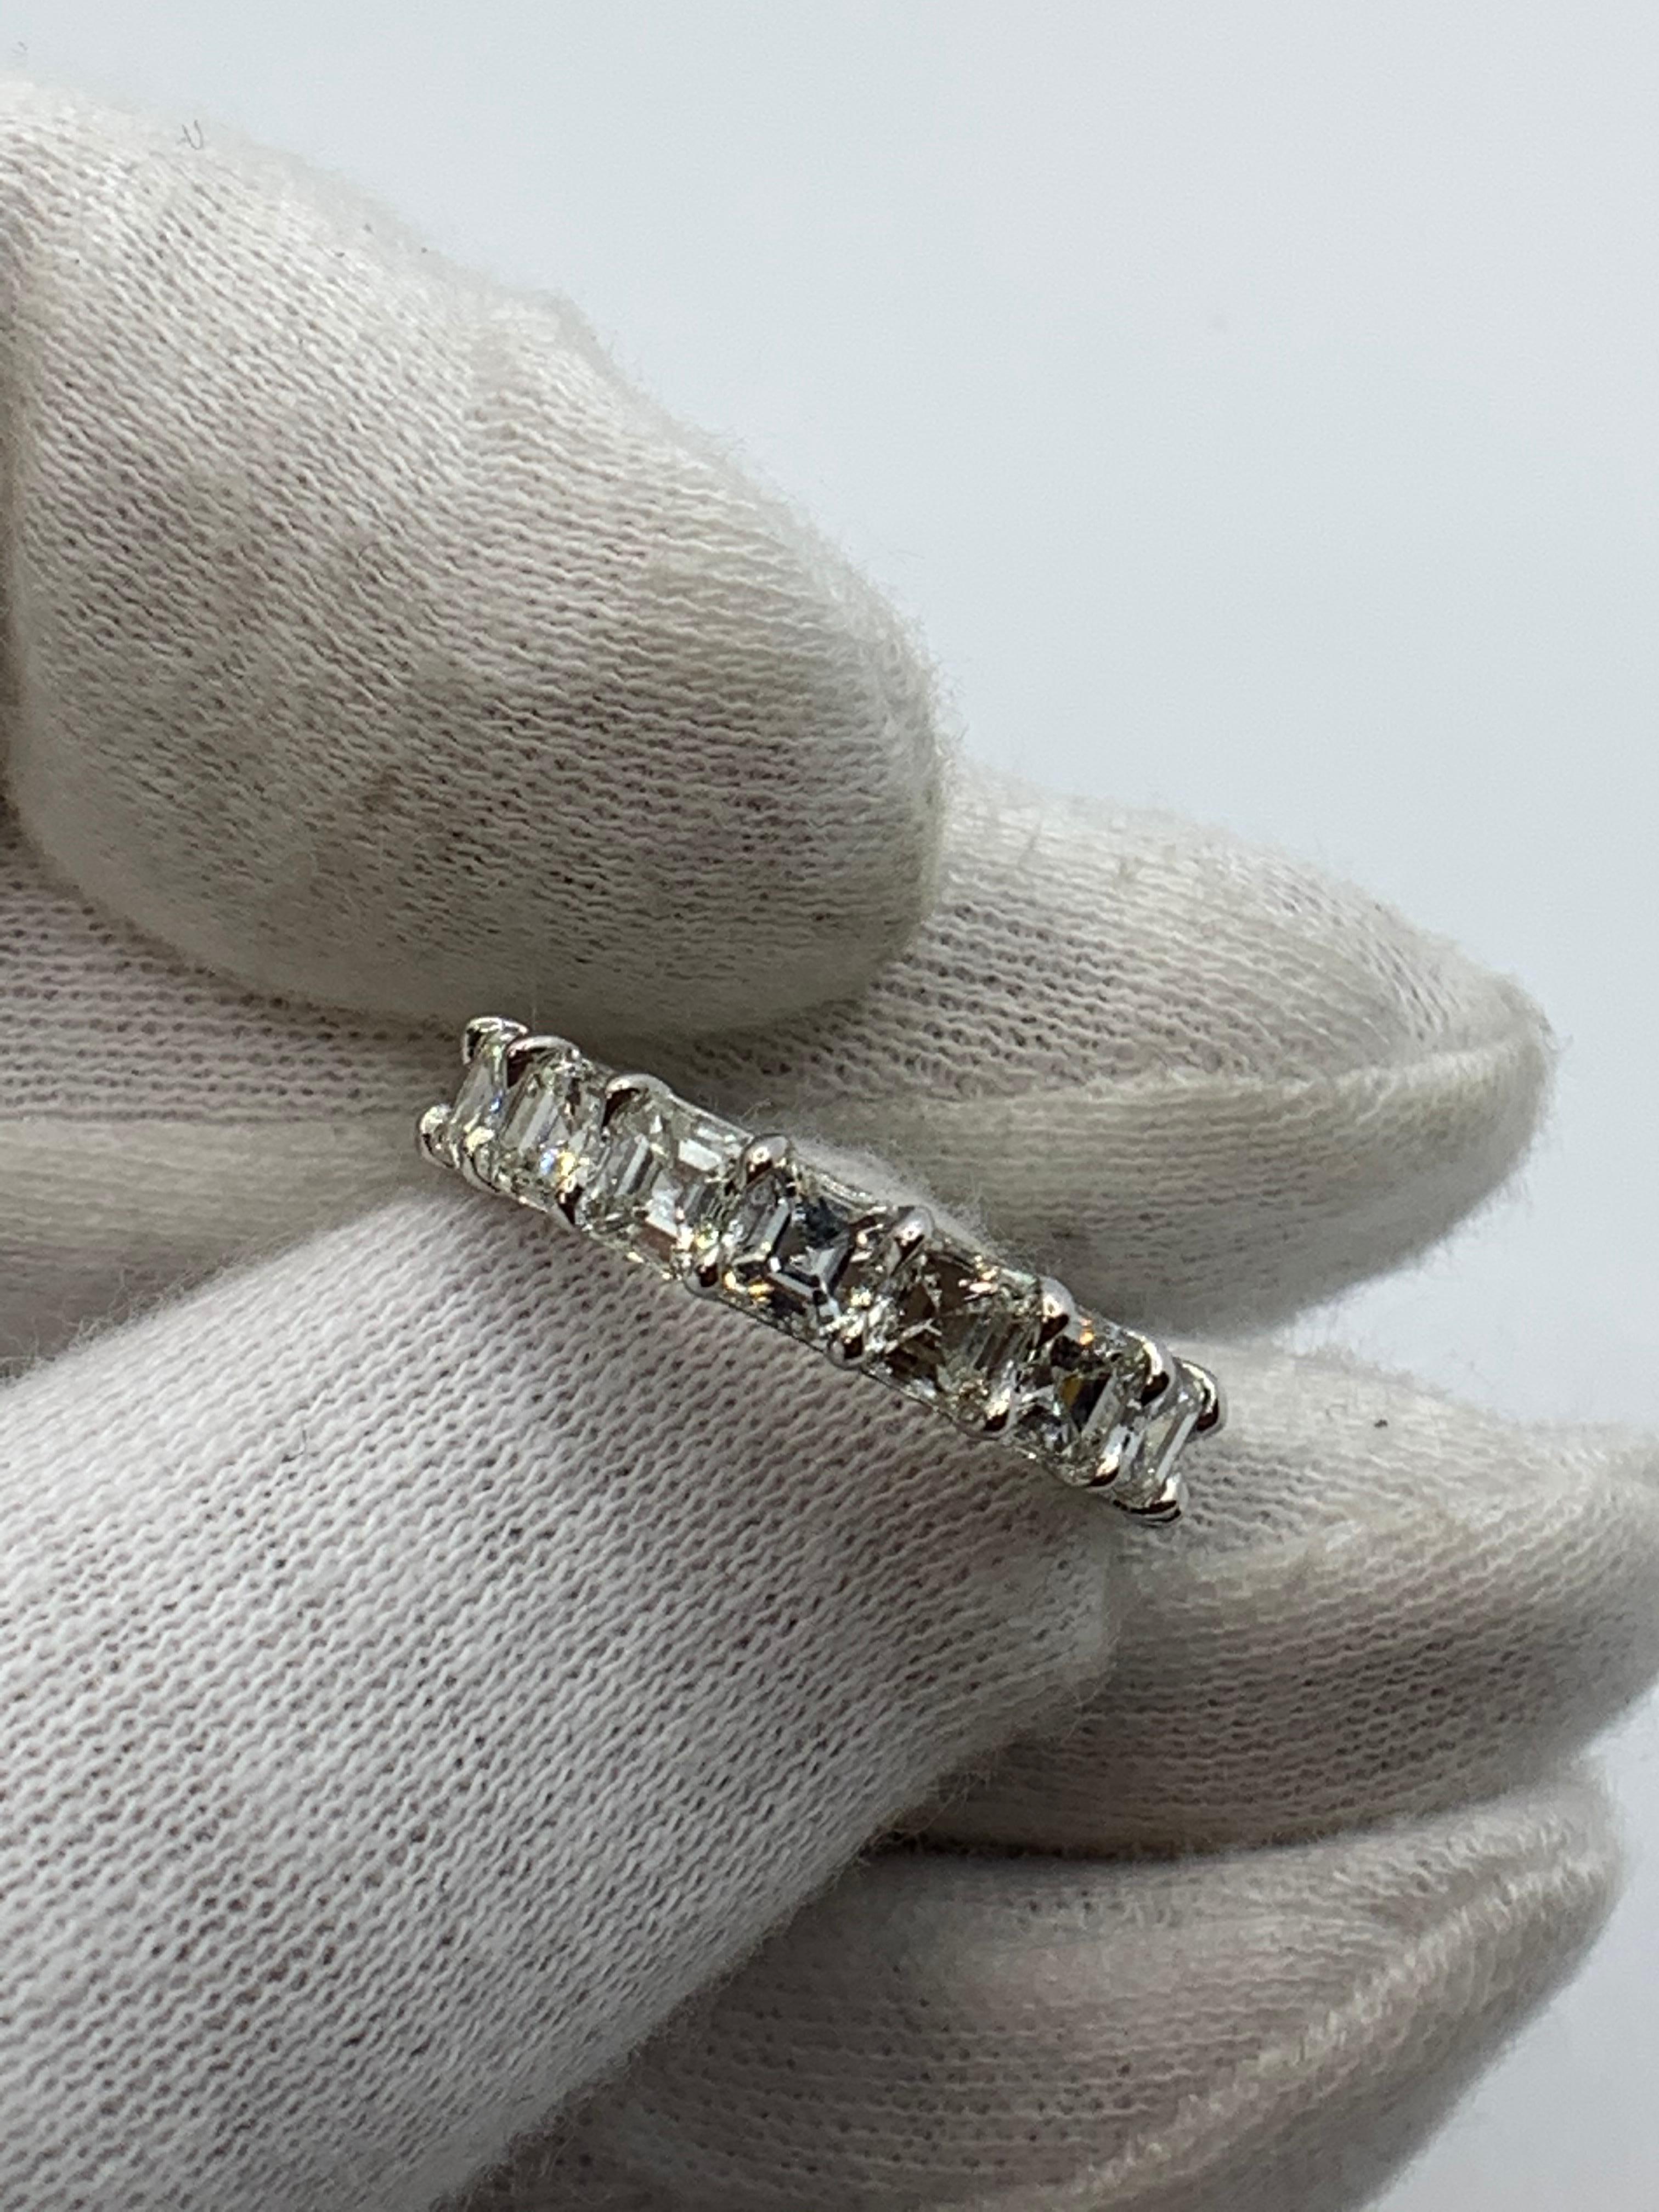 This Beautiful Eternity Band is set with 17 perfectly matched Asscher Cut Diamonds, each weighing over 0.40ct for a total of 6.75 Carats. Each stone is of G-H color and VVS-VS clarity. Made in New York City using Platinum 950. Fits US Size